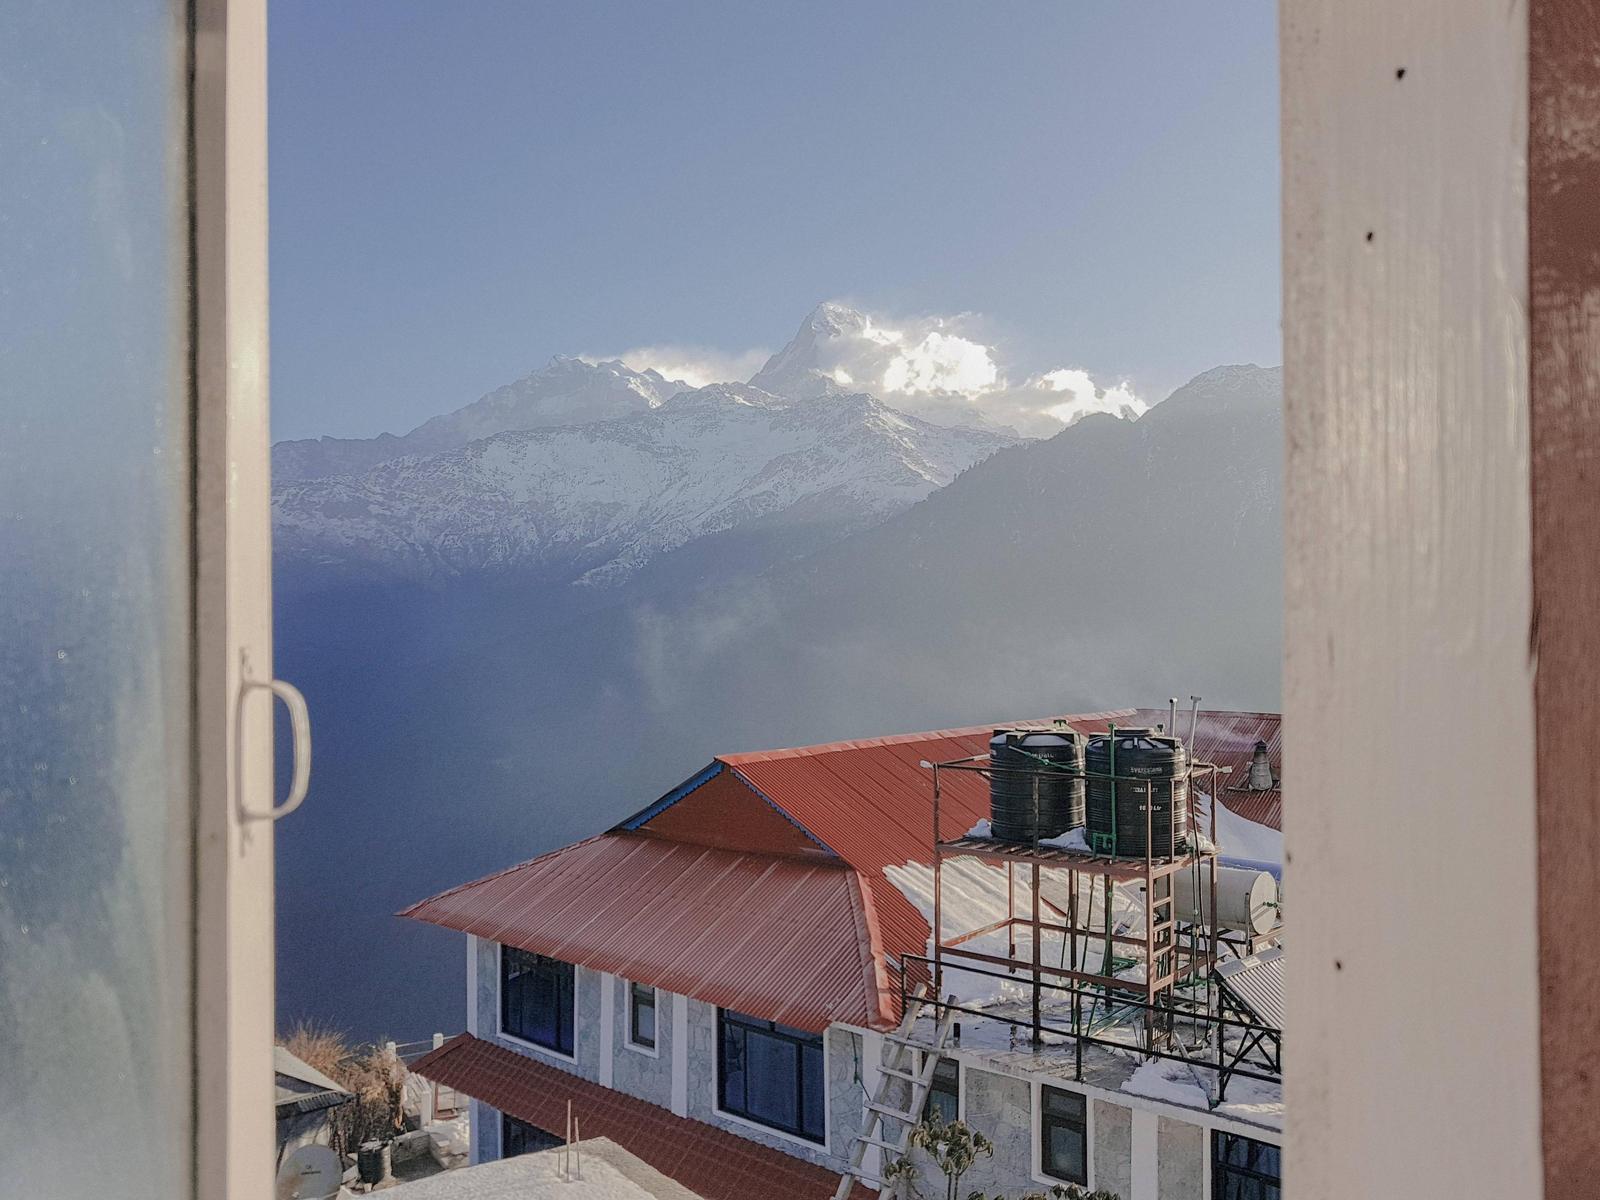 View from two dollar room, Nepal - Nepal, Nature, beauty, The mountains